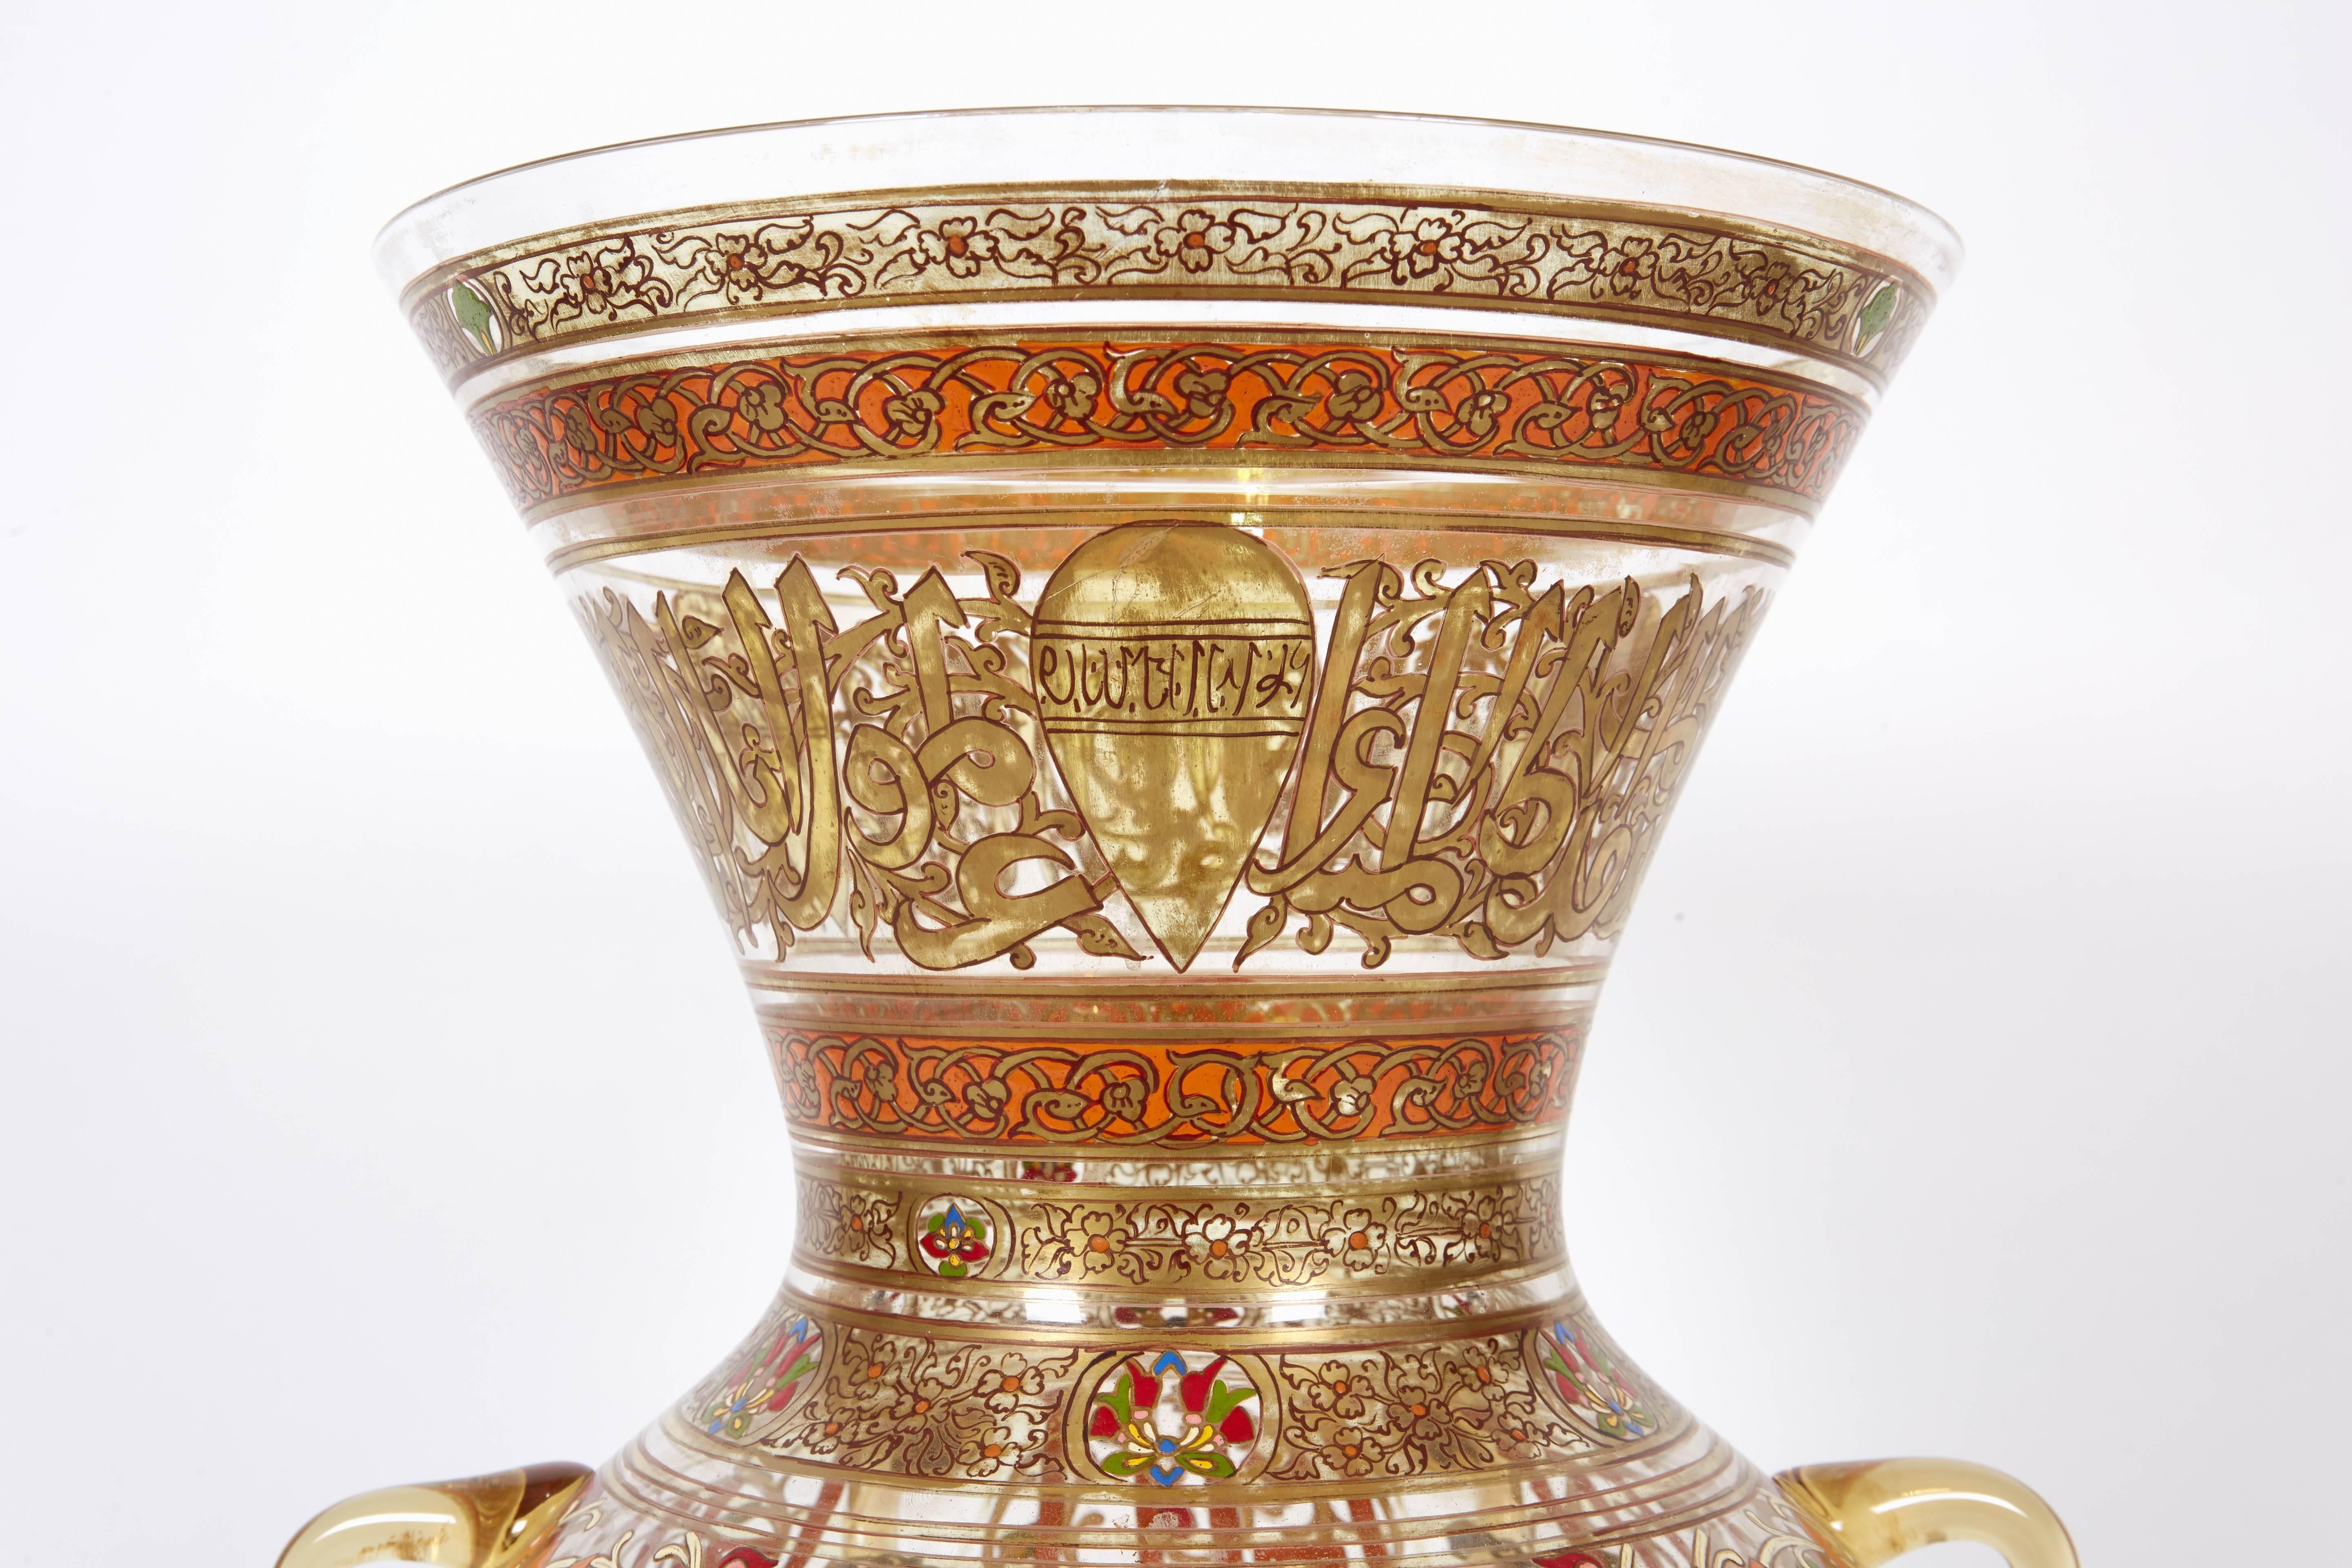 Rare French Enameled Mamluk Revival Glass Mosque Lamp by Philippe Joseph Brocard In Excellent Condition For Sale In New York, NY